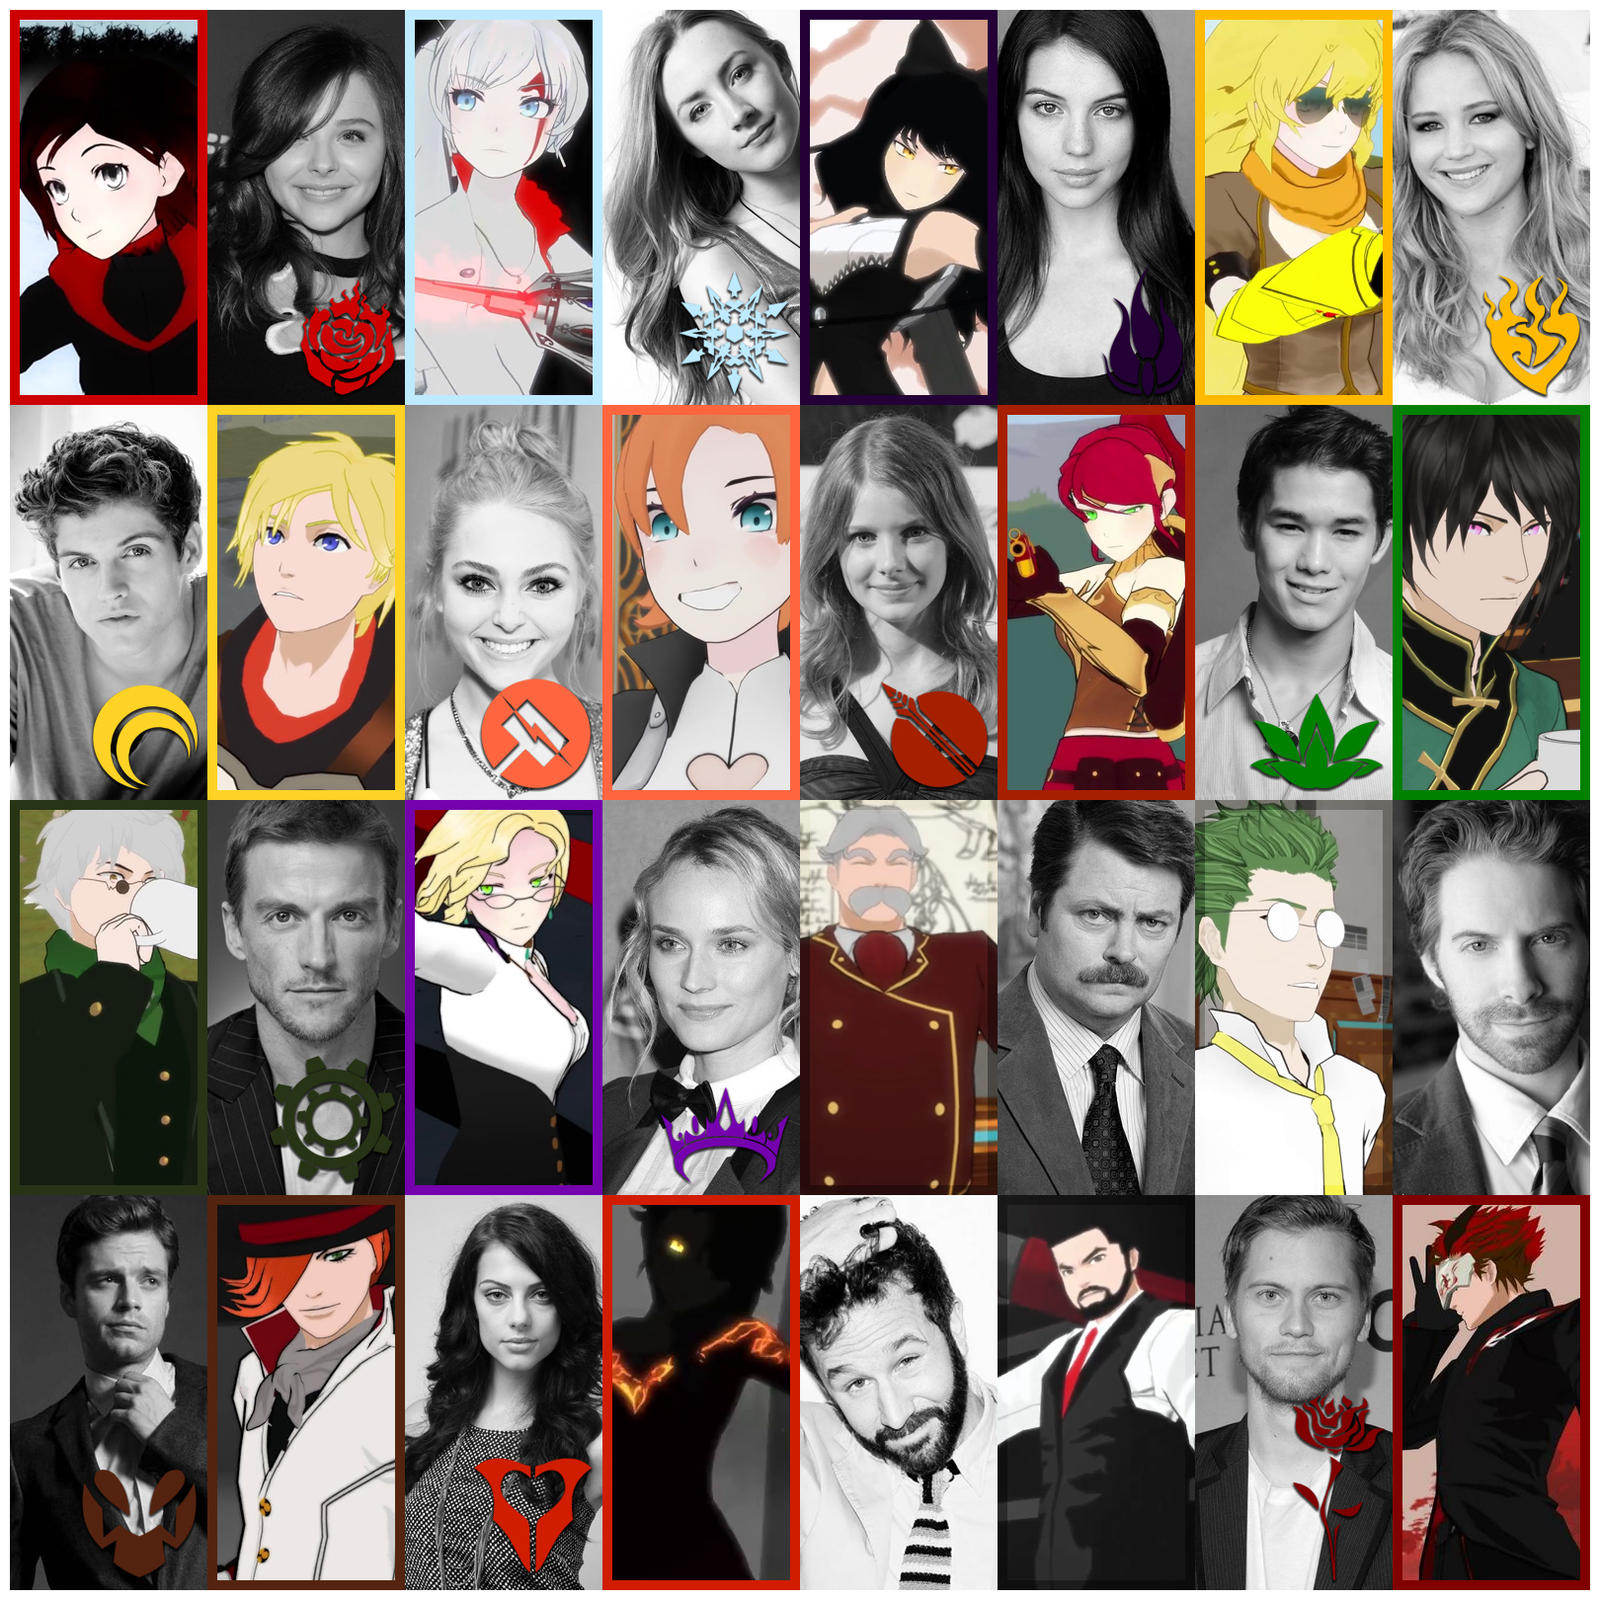 The Hunger Games: Catching Fire by hjpenndragon on DeviantArt